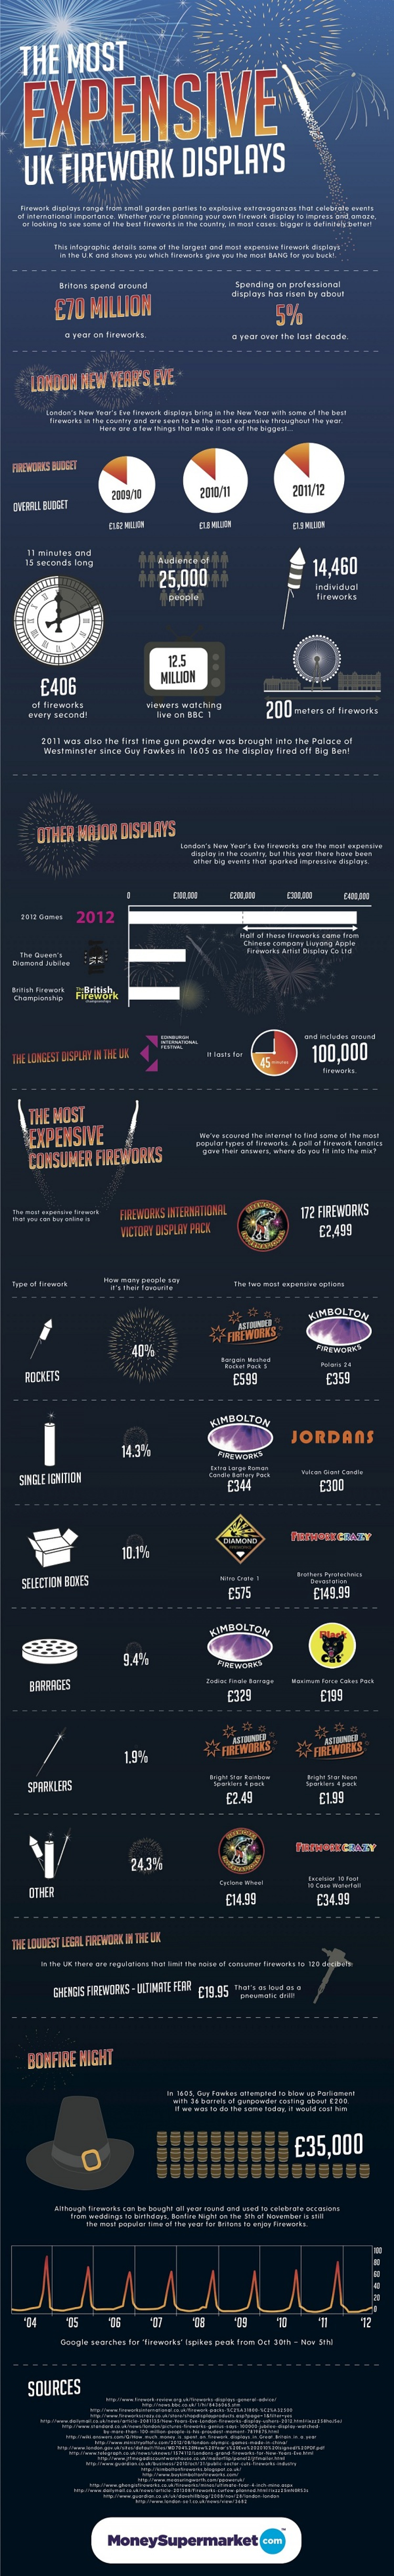 The most expensive UK fireworks displays Infographic